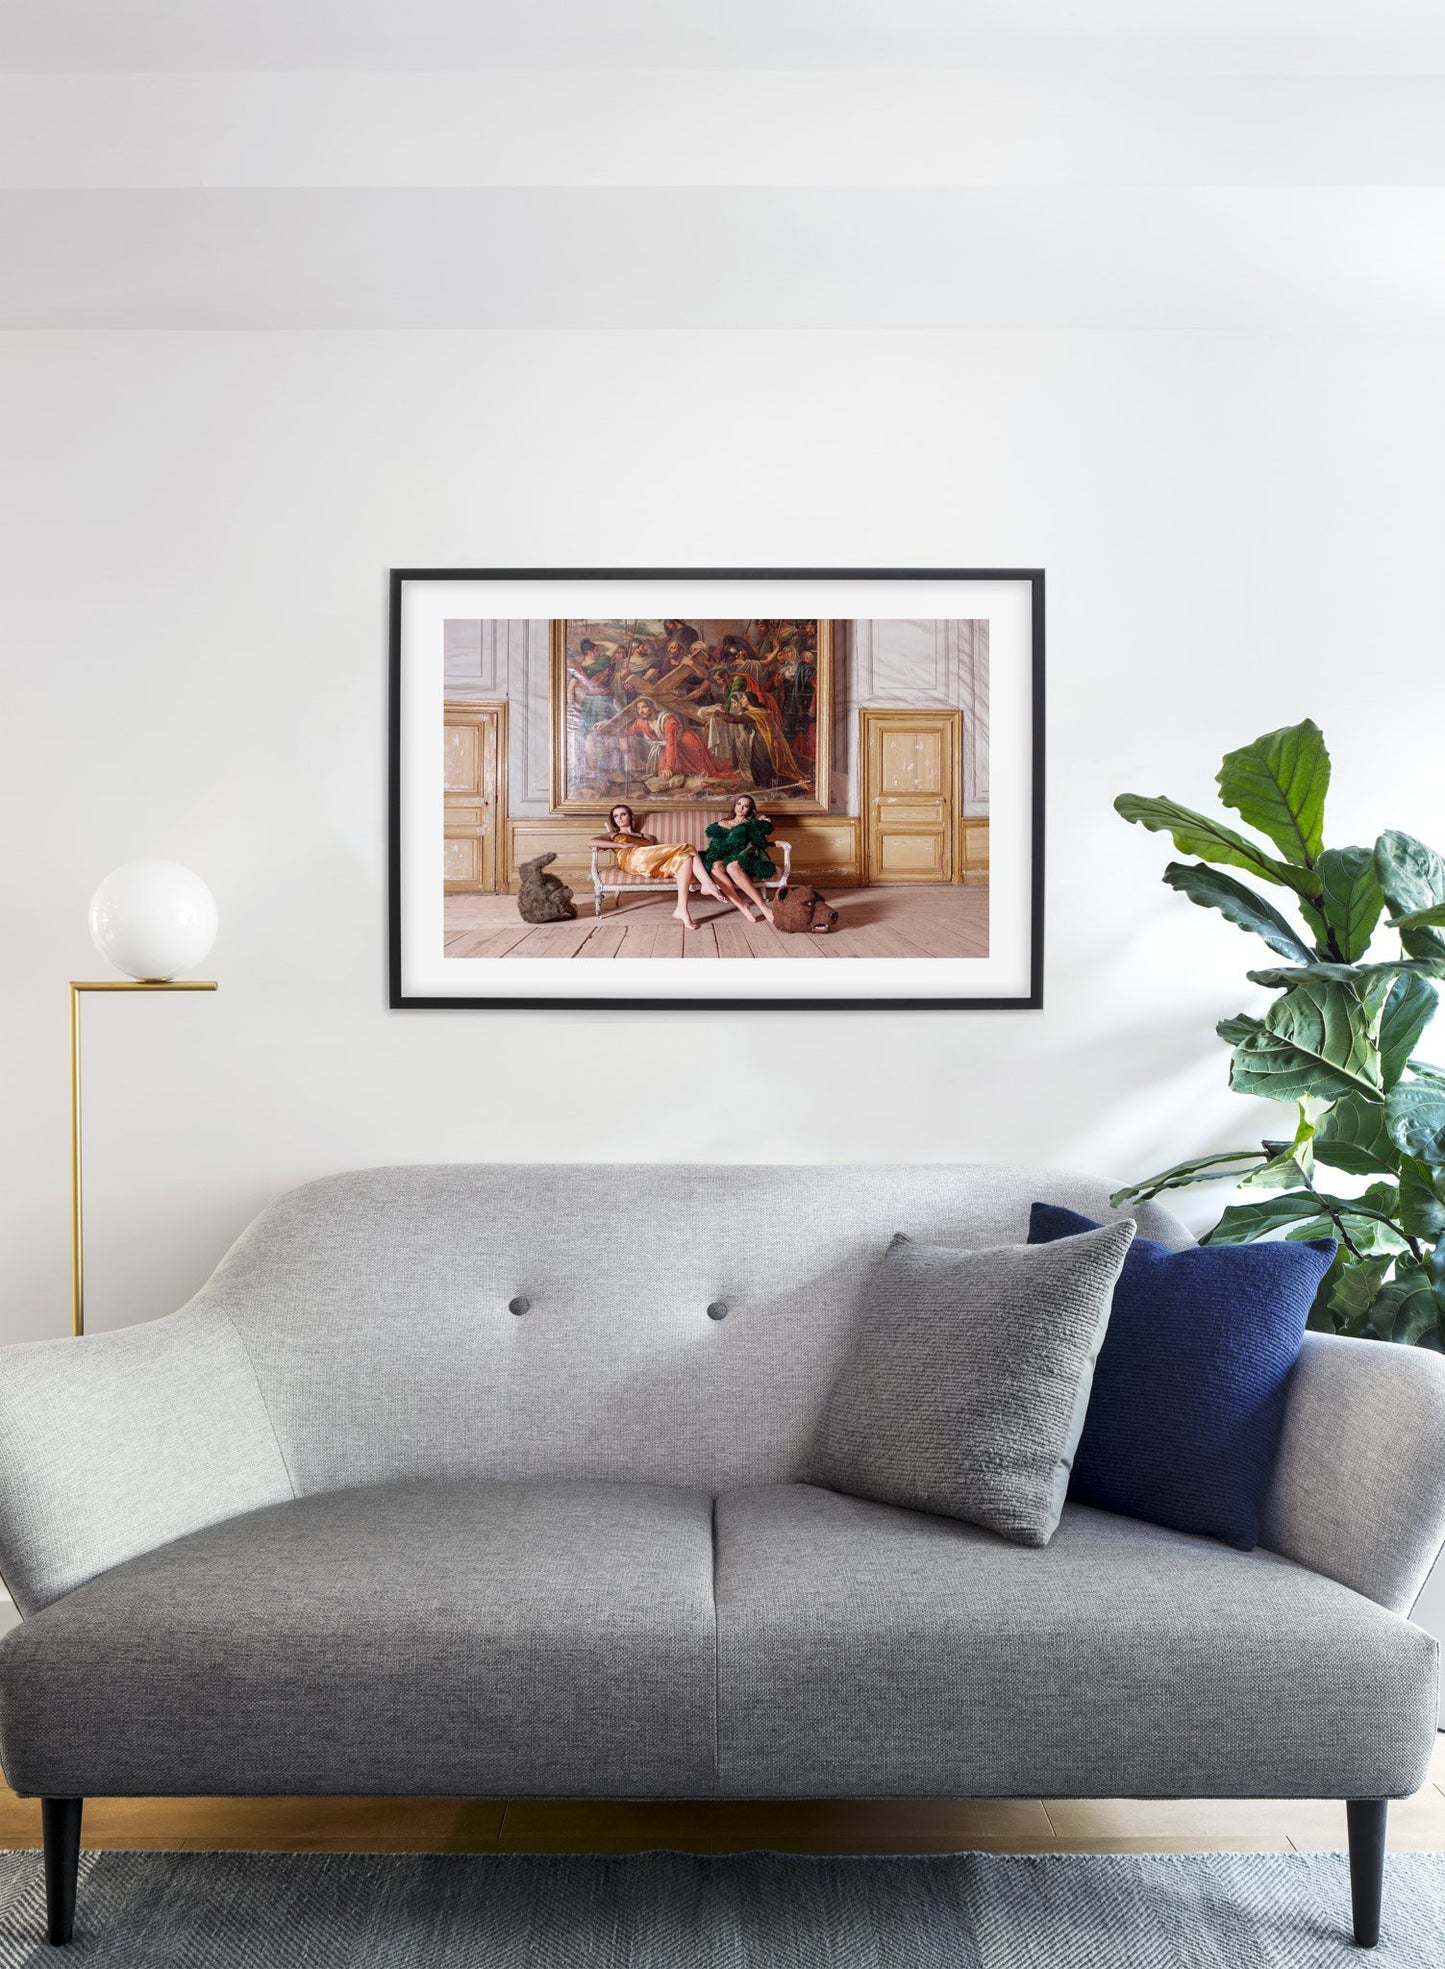 Minimalist design photography poster of Salon by Love Warriors Creative Studio - Buy at Opposite Wall - Living room